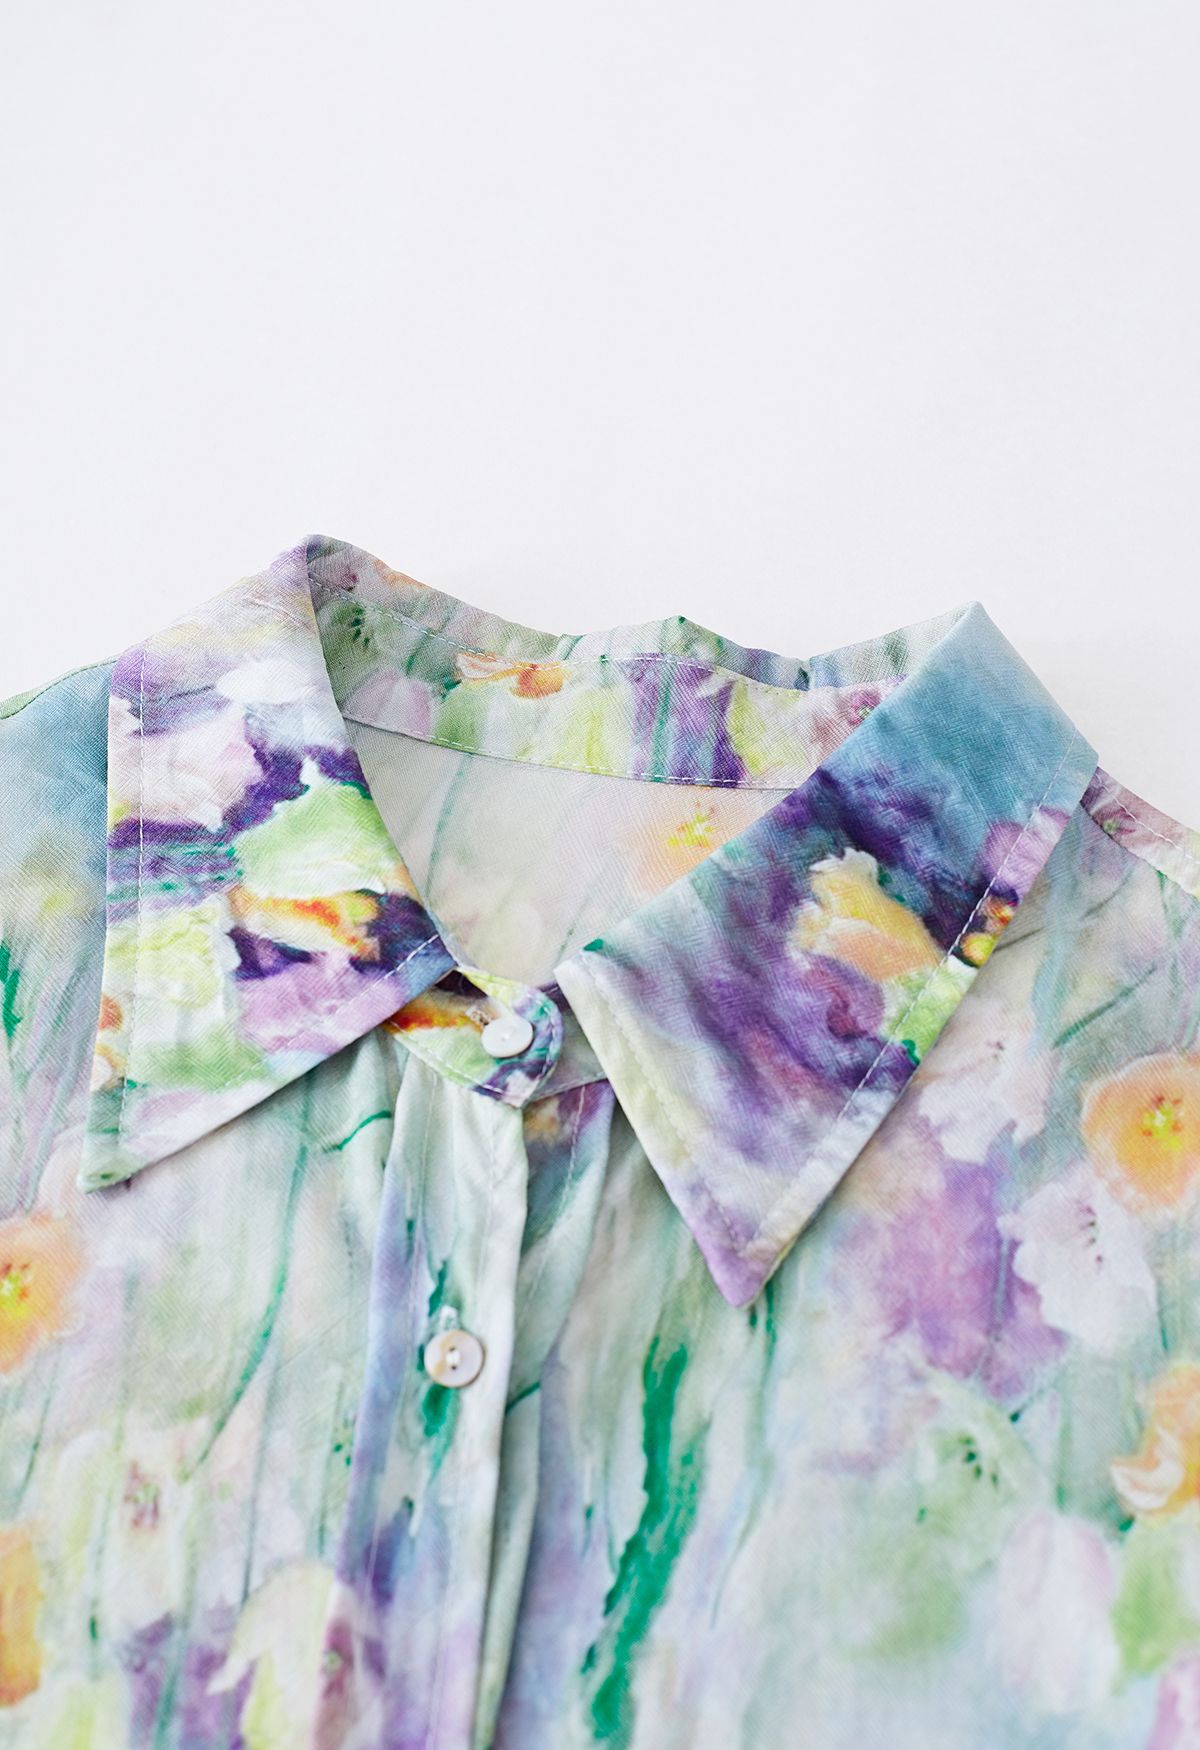 Floral Oil Painting Button Down Shirt